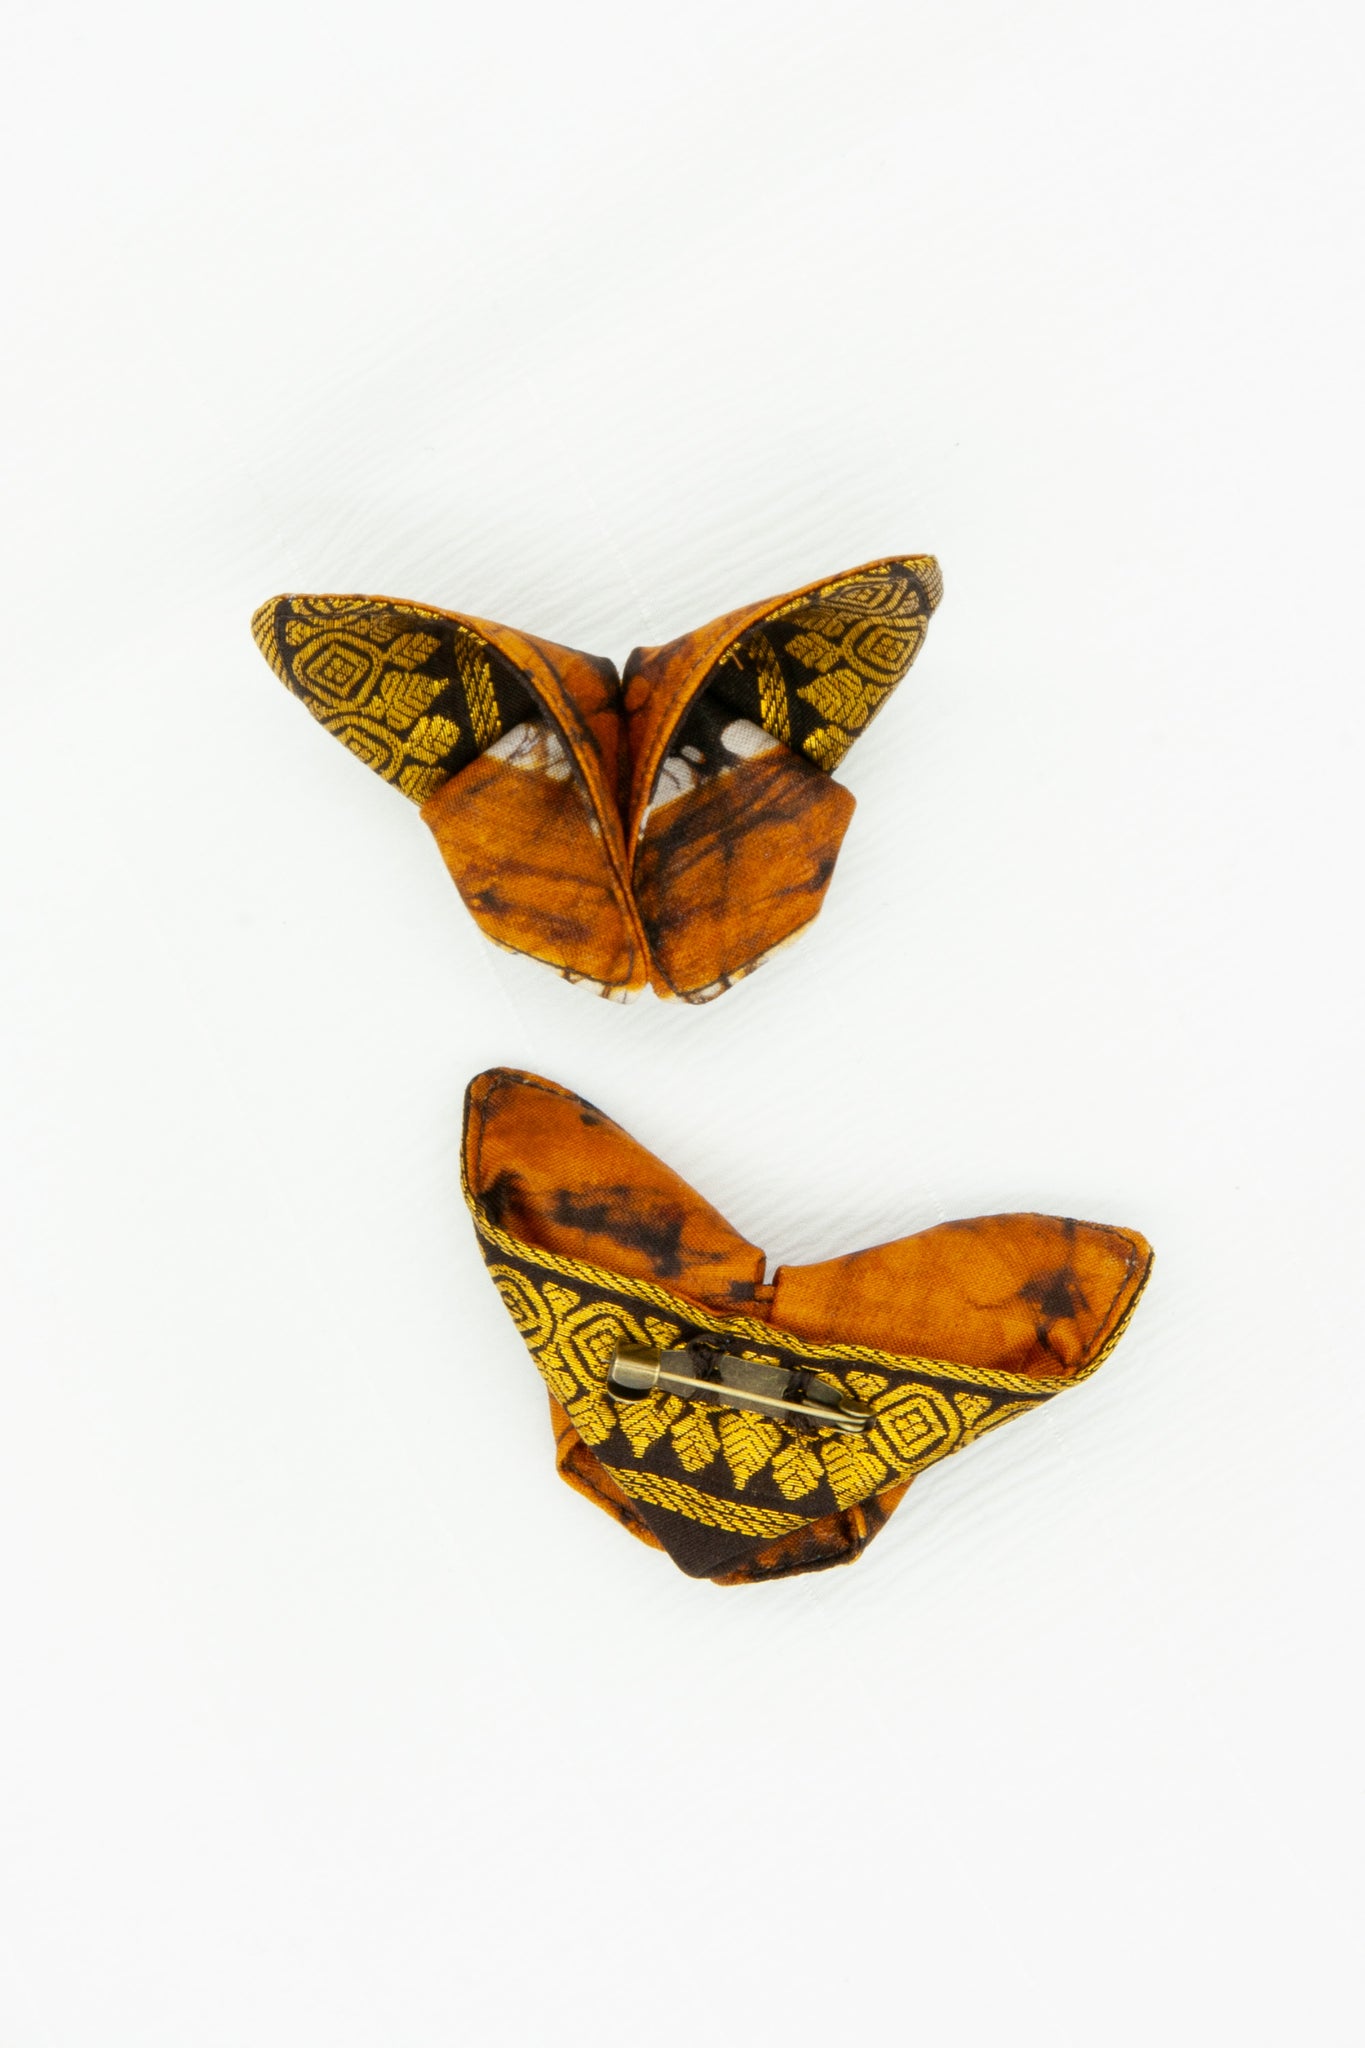 Butterfly Brooch in Orange and Brown Dyed Indian Silk with Gold Embroidery